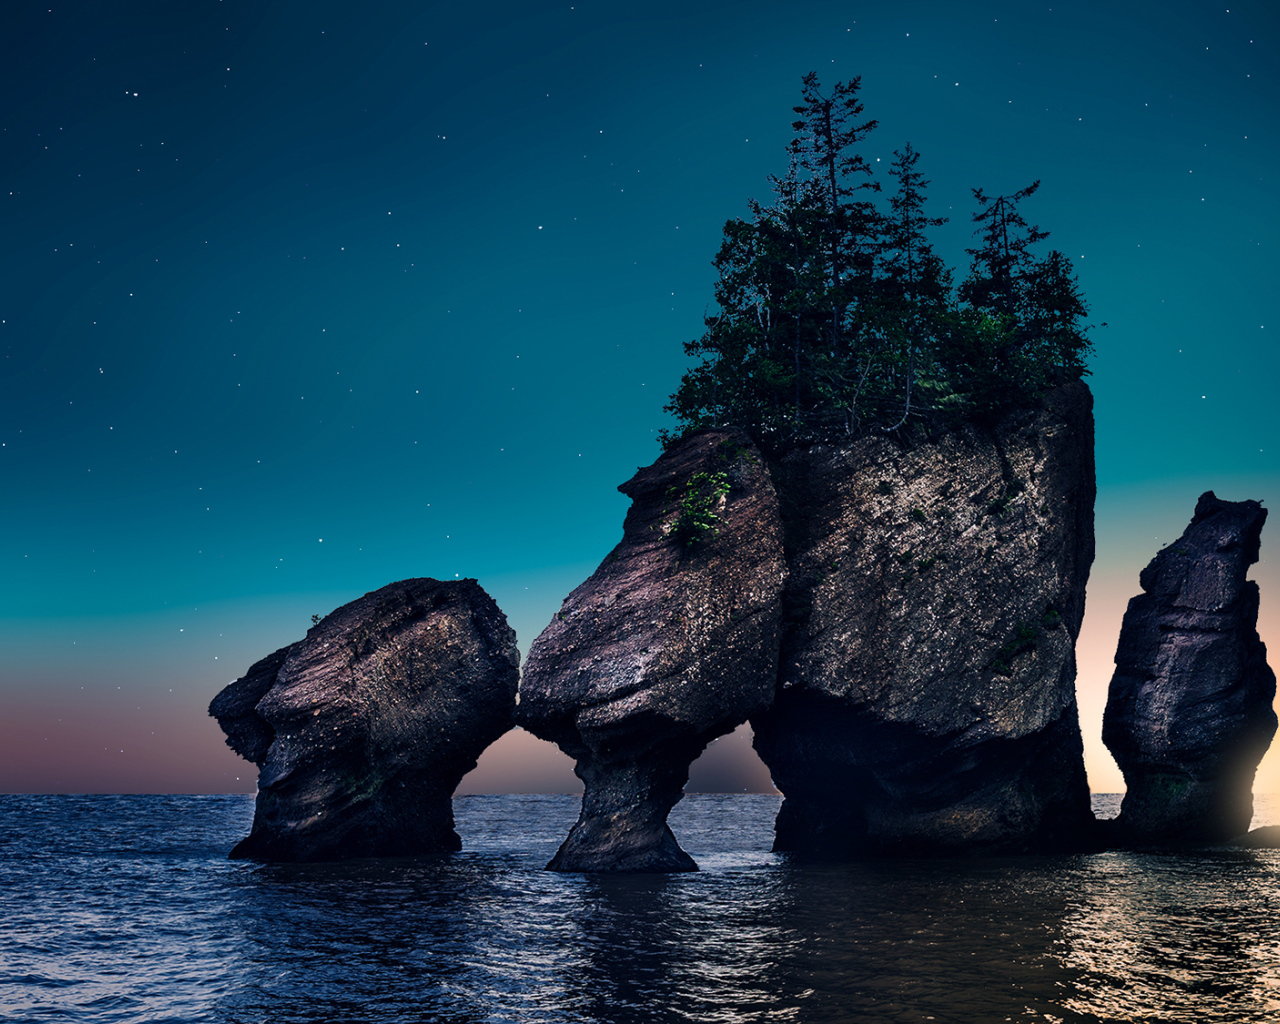 Rocks with trees in the water at night